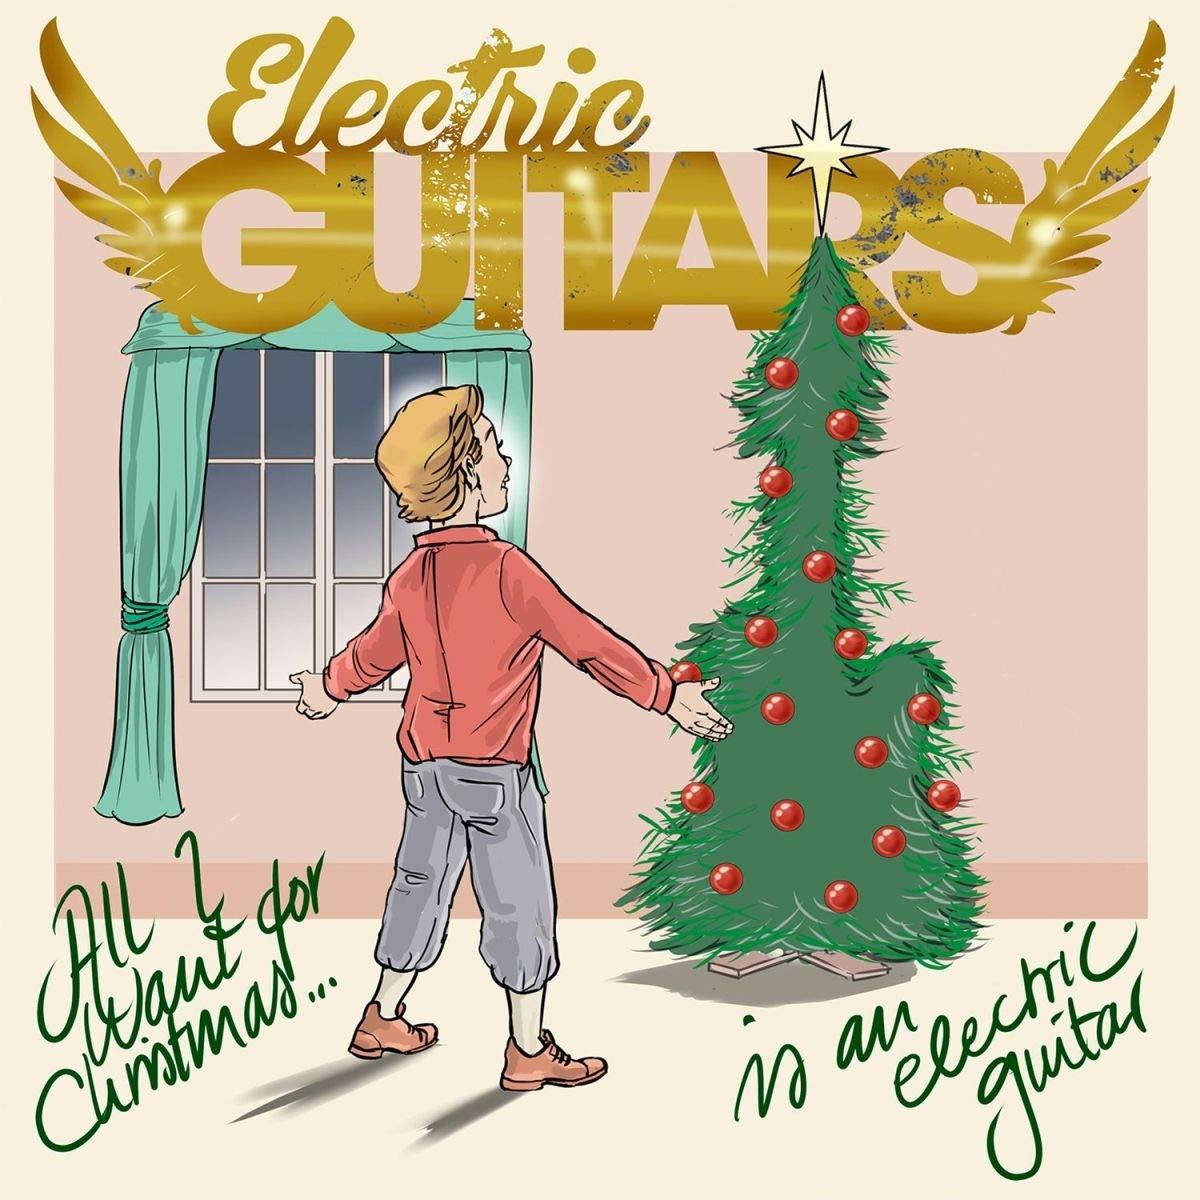 -COLOURED- Guitars - - I WANT.. (EP 7-ALL Electric (analog))